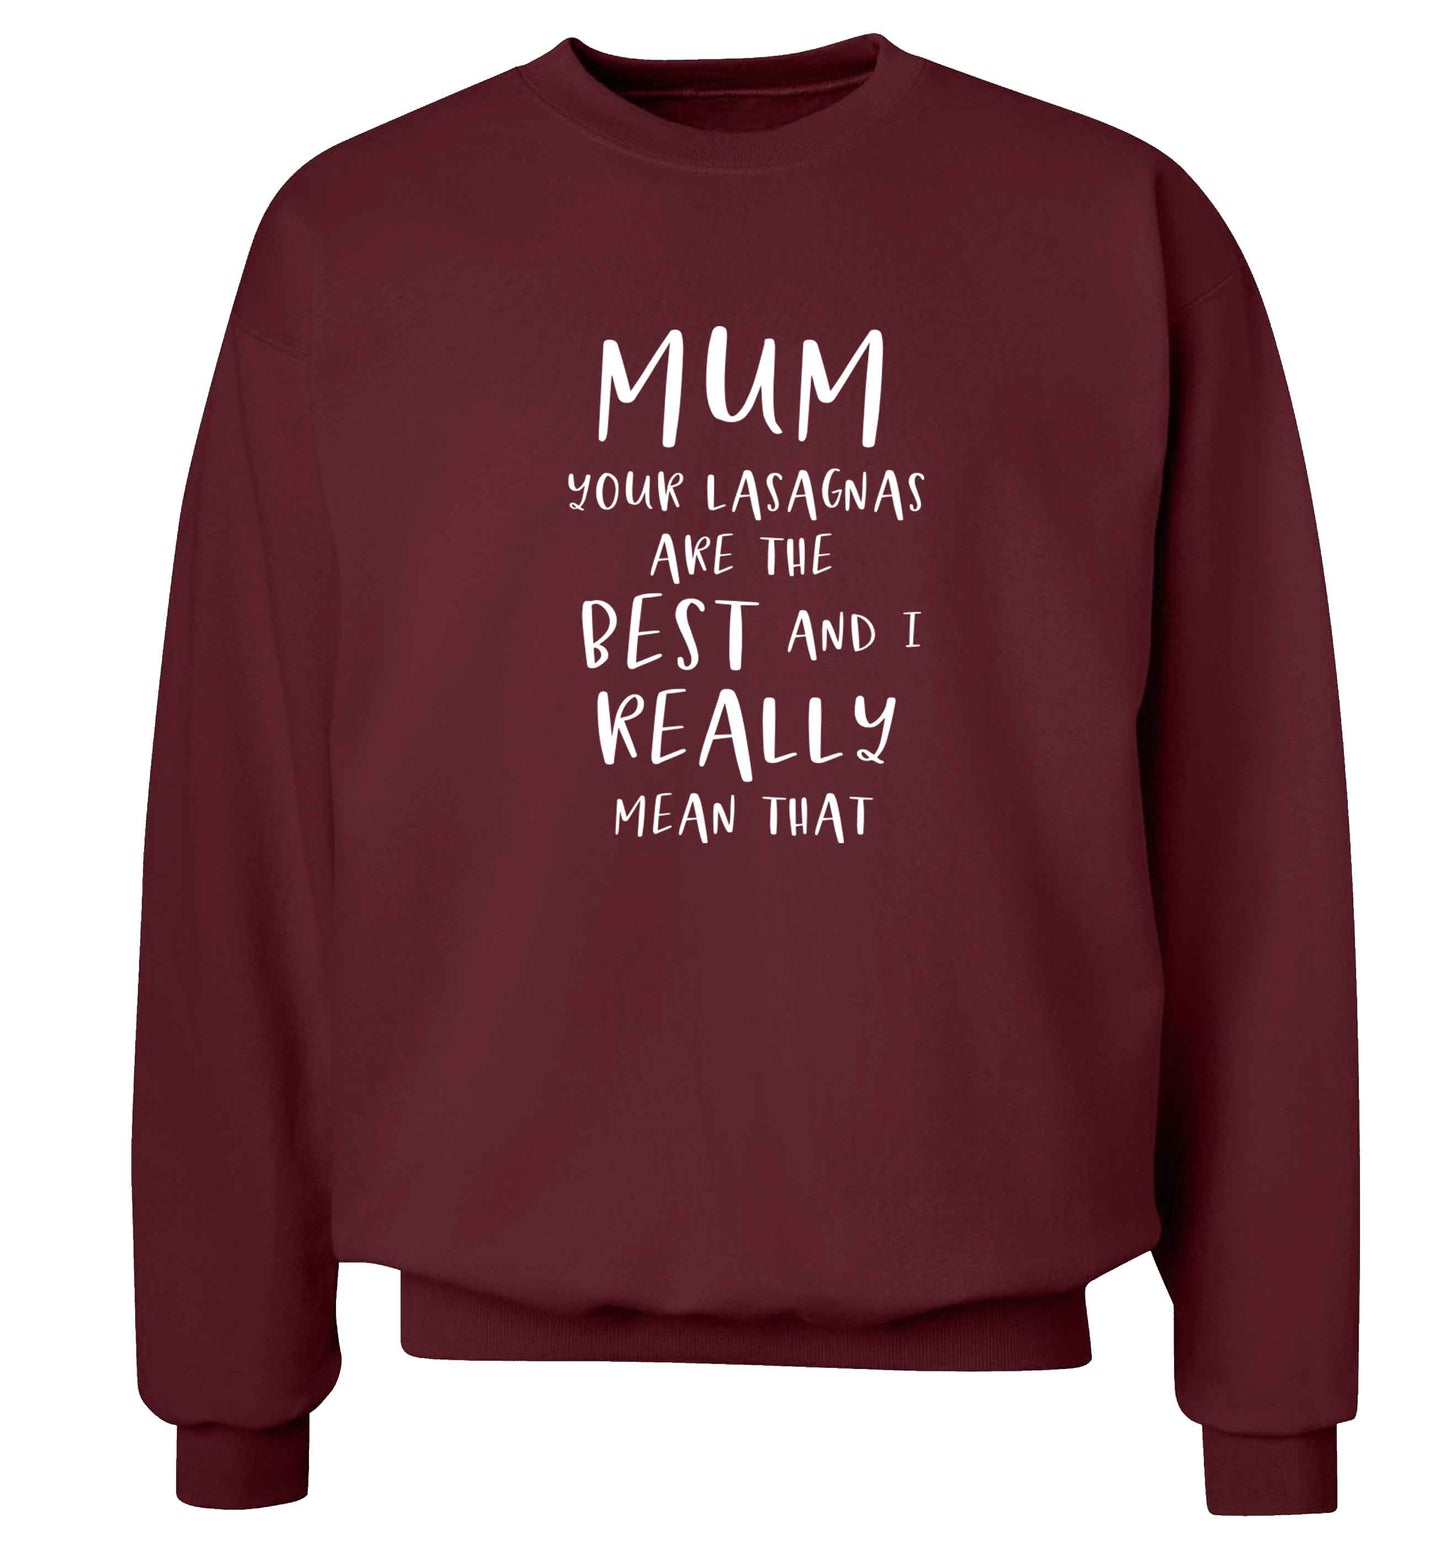 Funny gifts for your mum on mother's dayor her birthday! Mum your lasagnas are the best and I really mean that adult's unisex maroon sweater 2XL